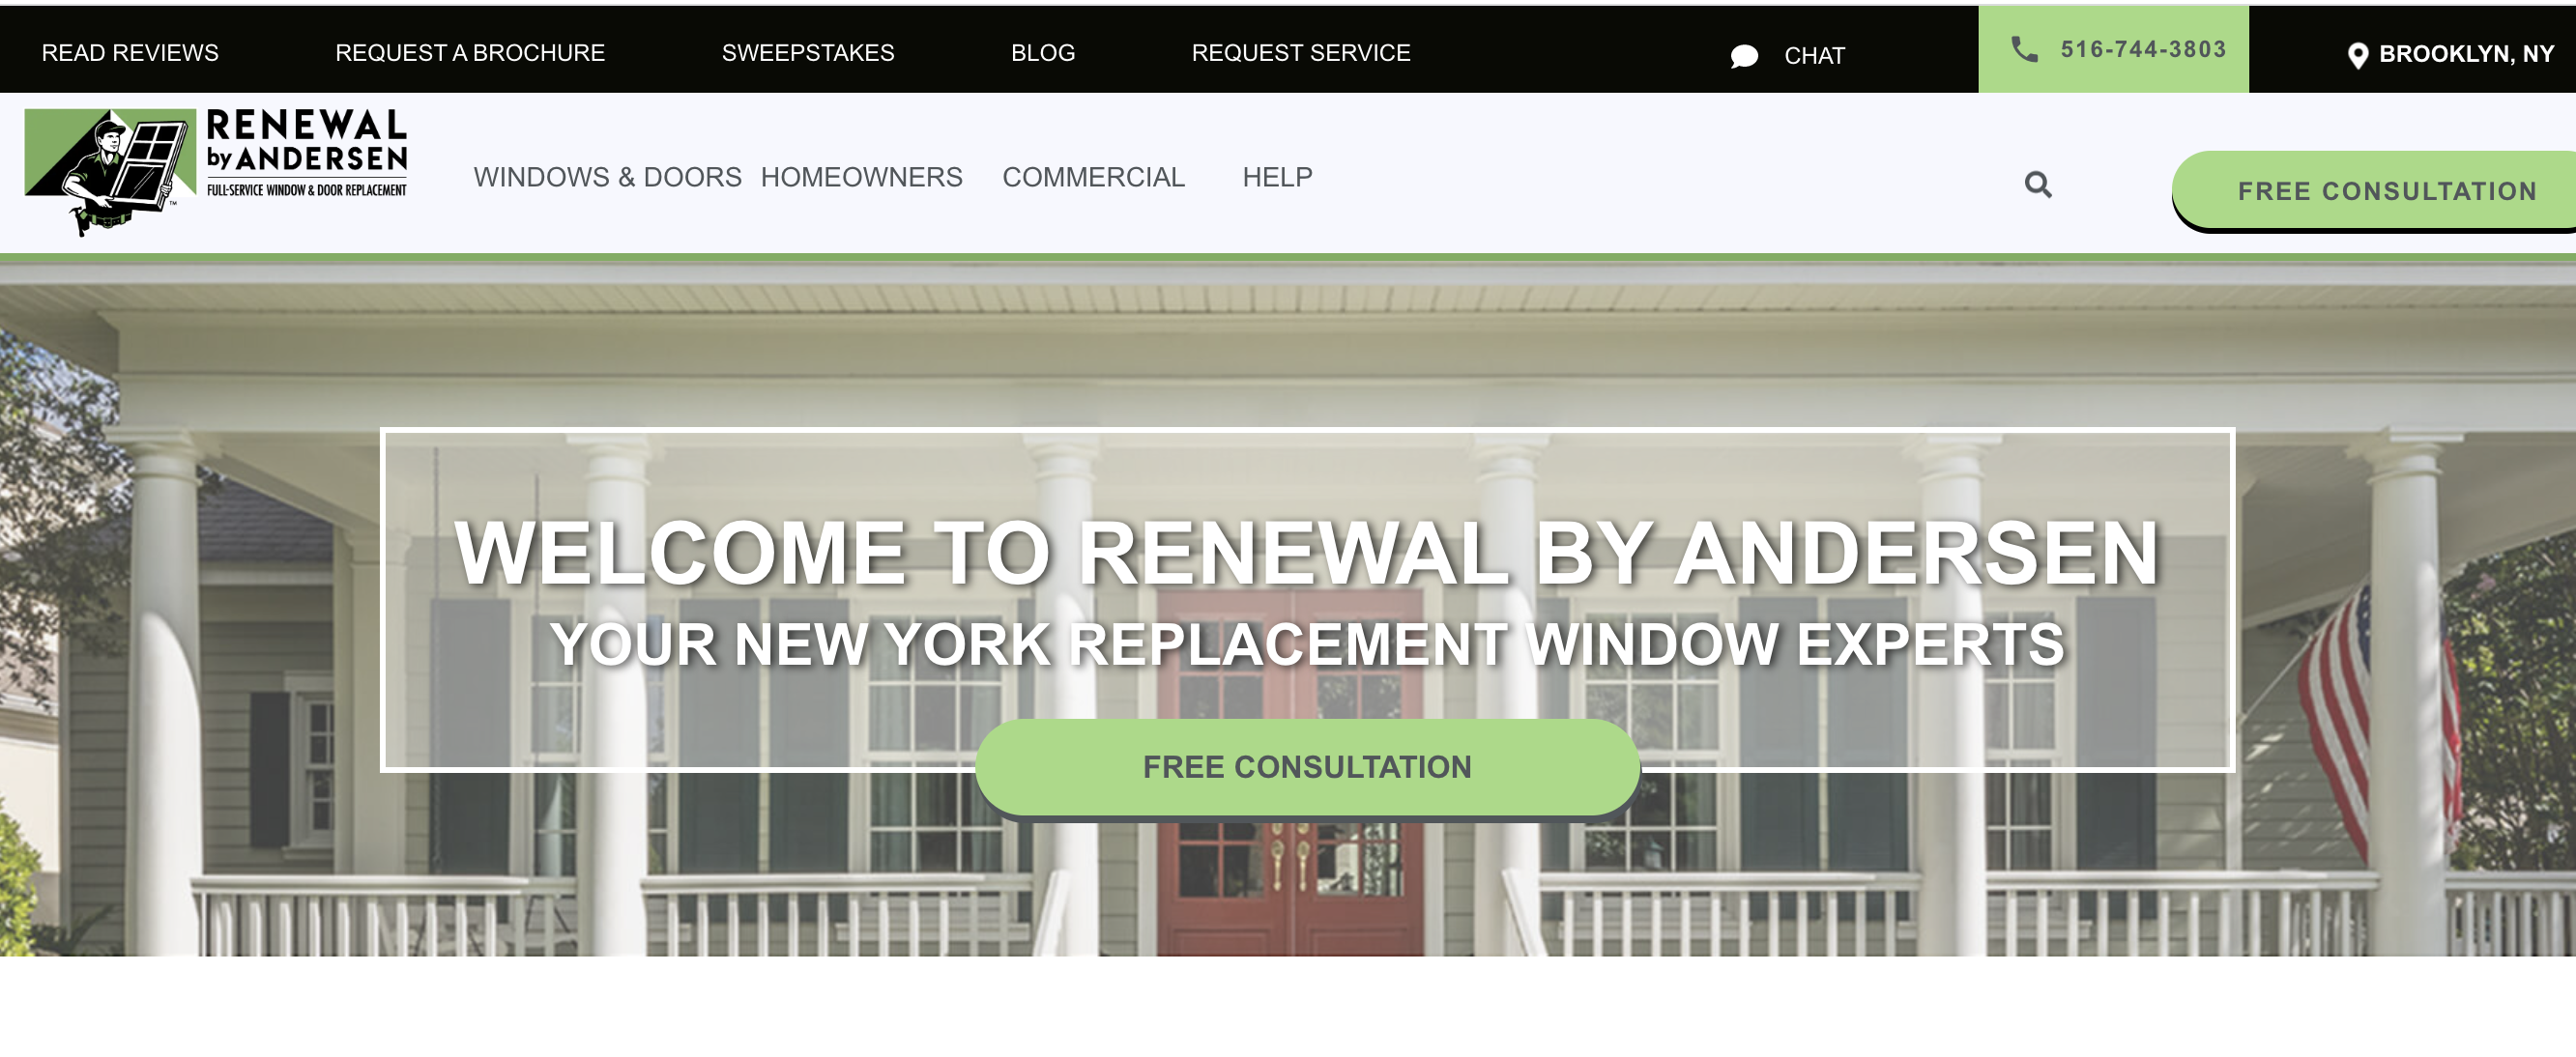 A screenshot of the Renewal by Andersen home page.